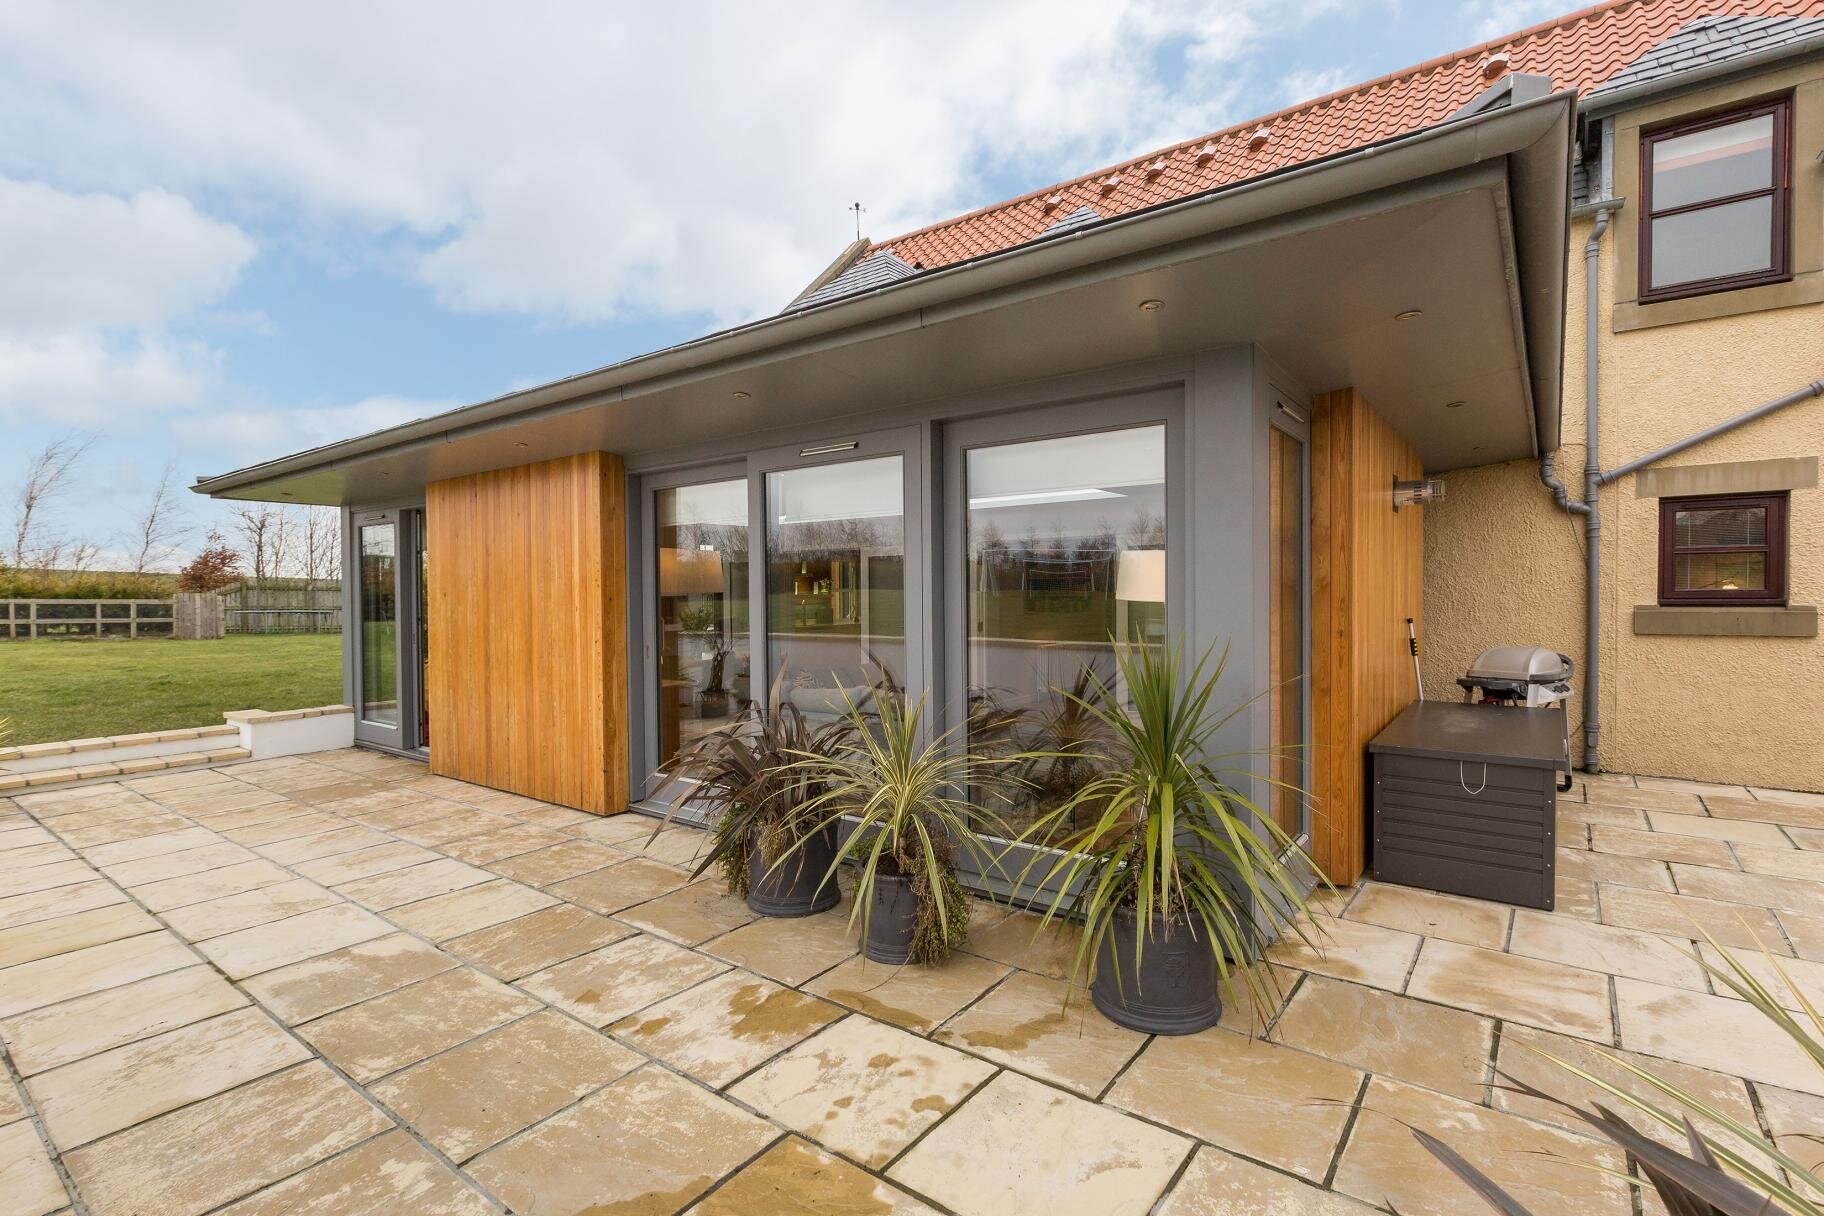  The timber-clad rear extension forms a new dining and family room area. 